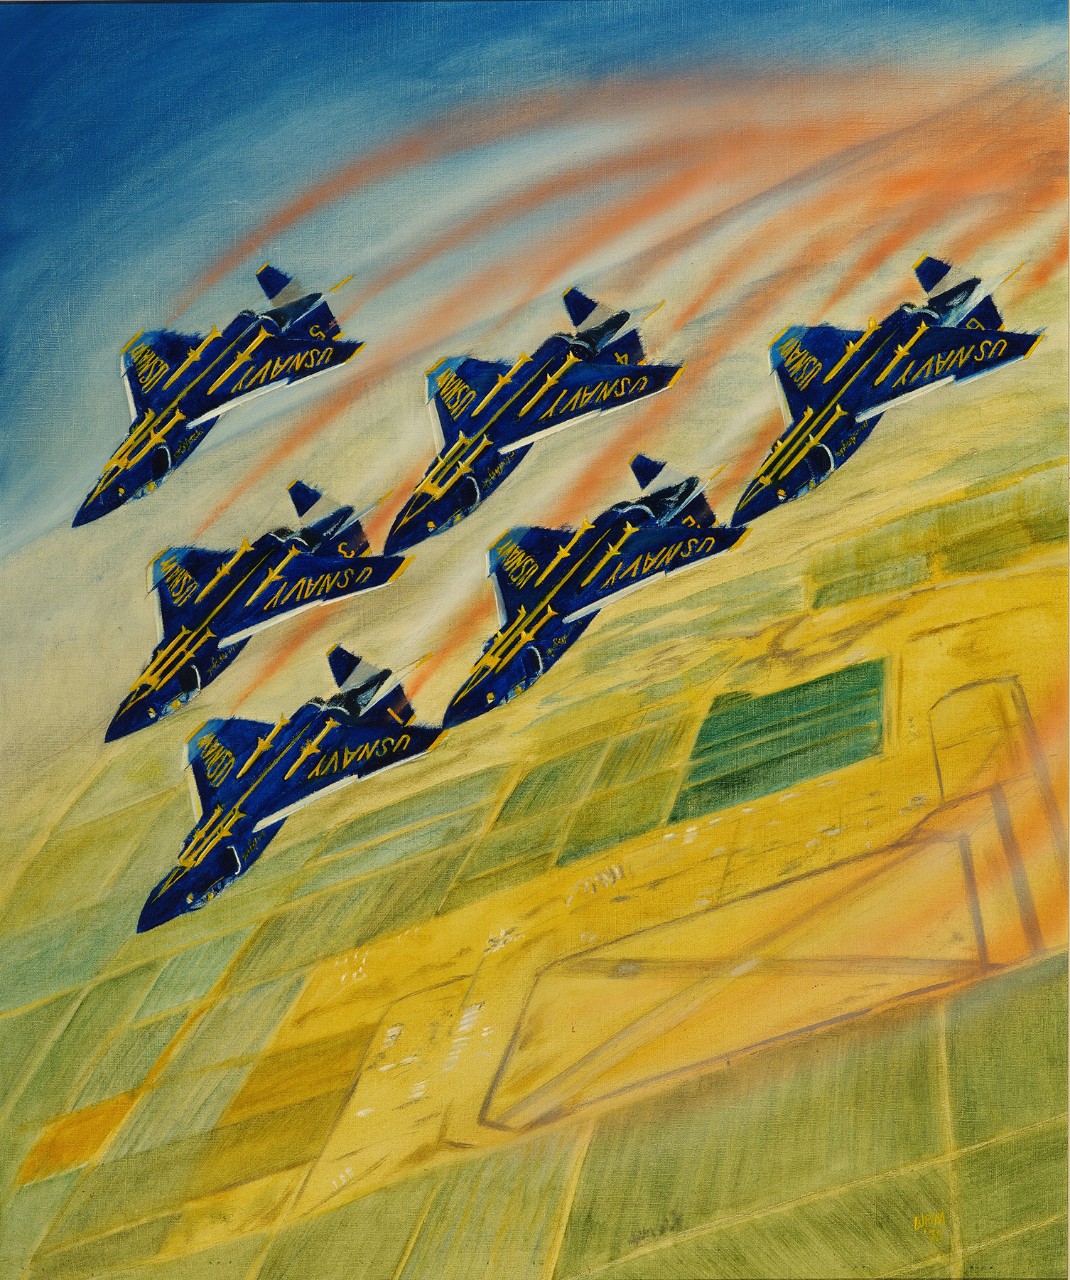 Six Blue Angels flying upside down over fields